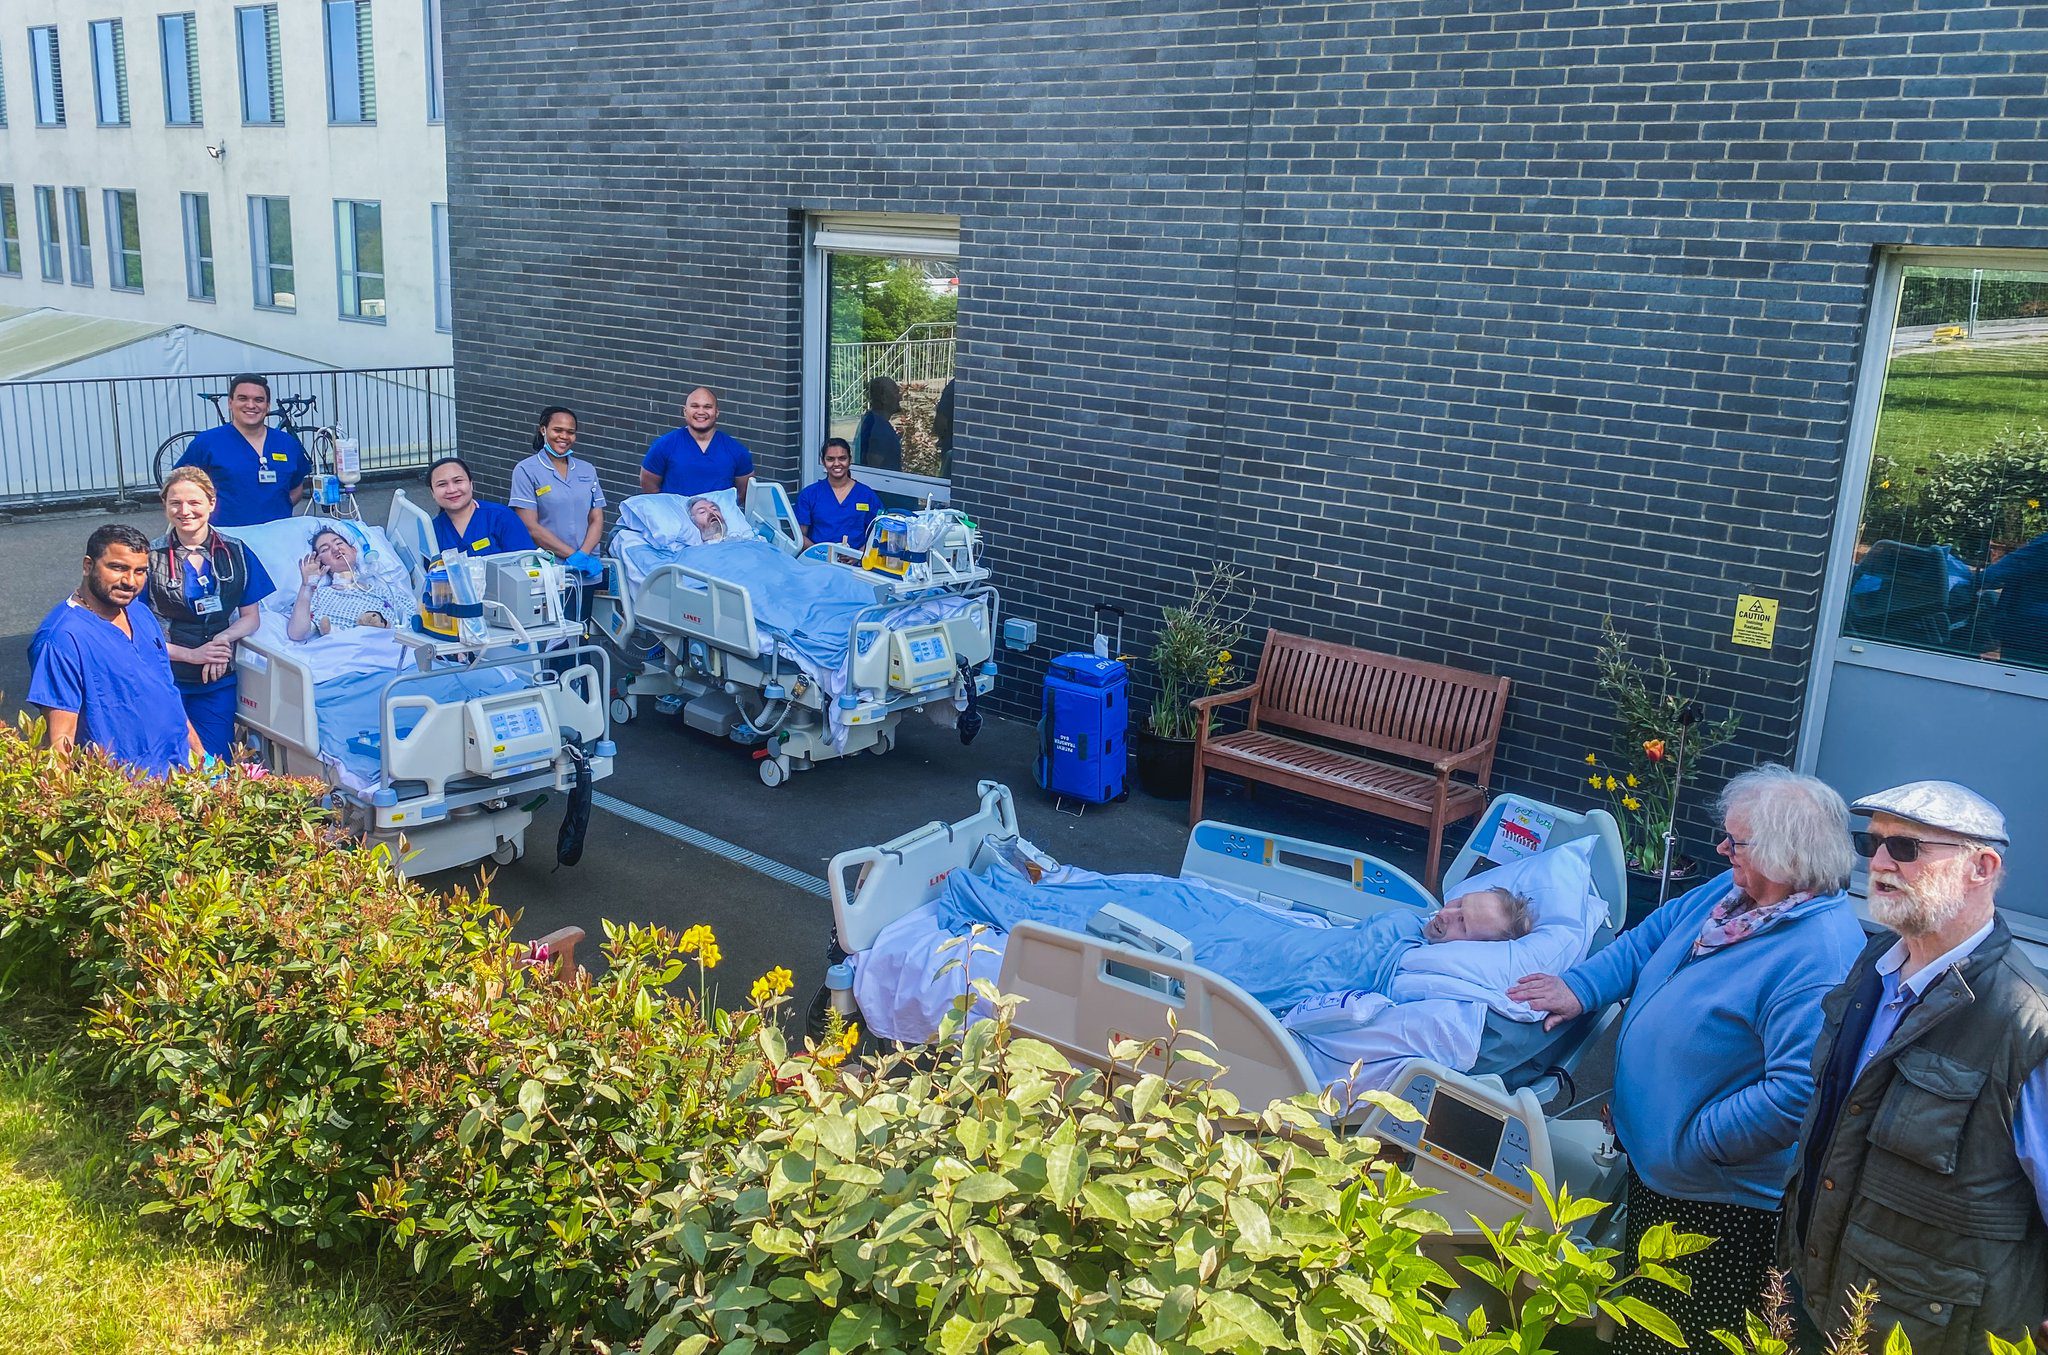 ITU patients get a glimpse of sunshine to aid recovery